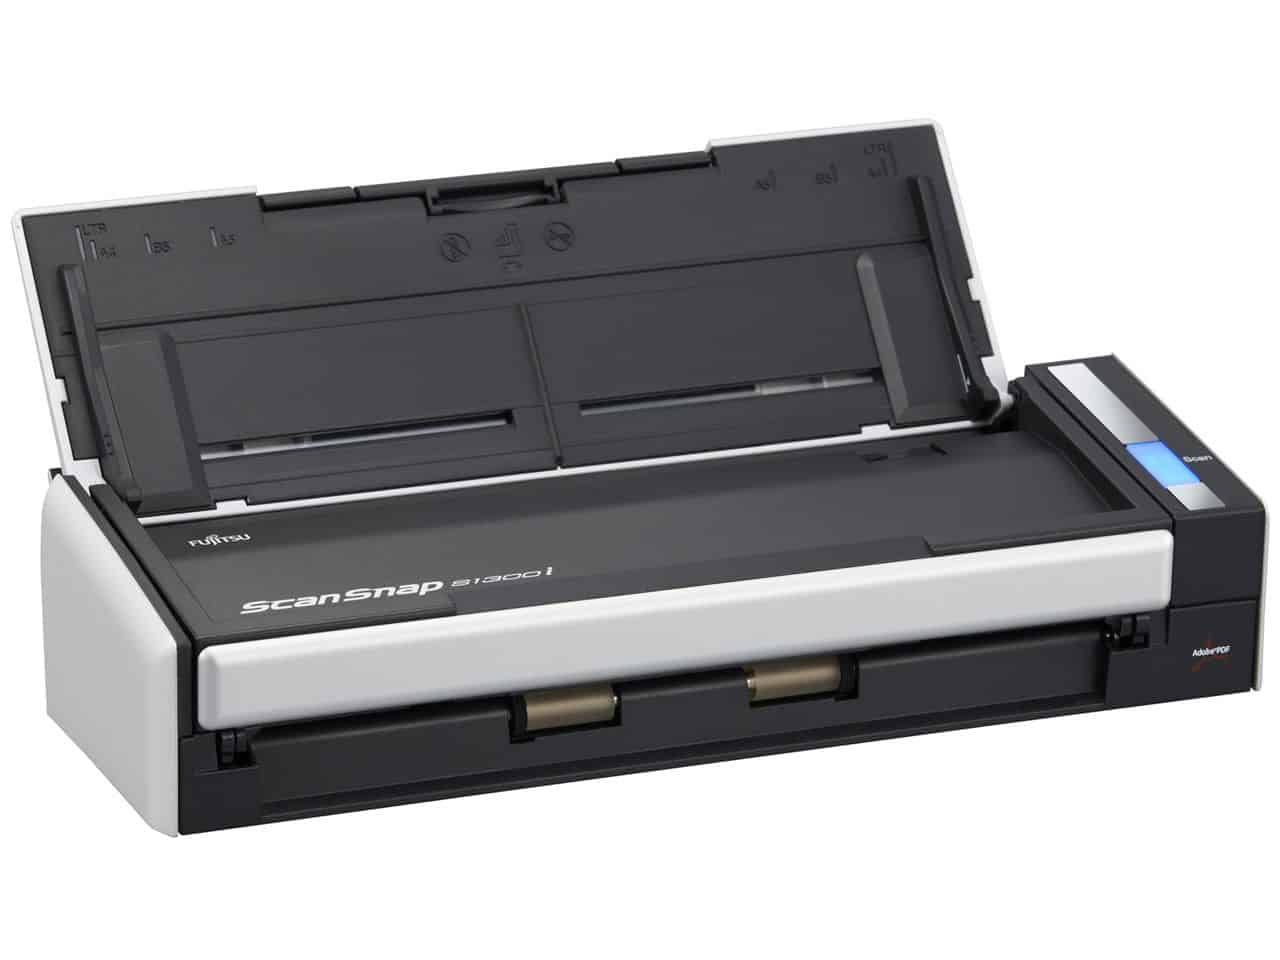 fujitsu scansnap s1500 driver download for windows 7